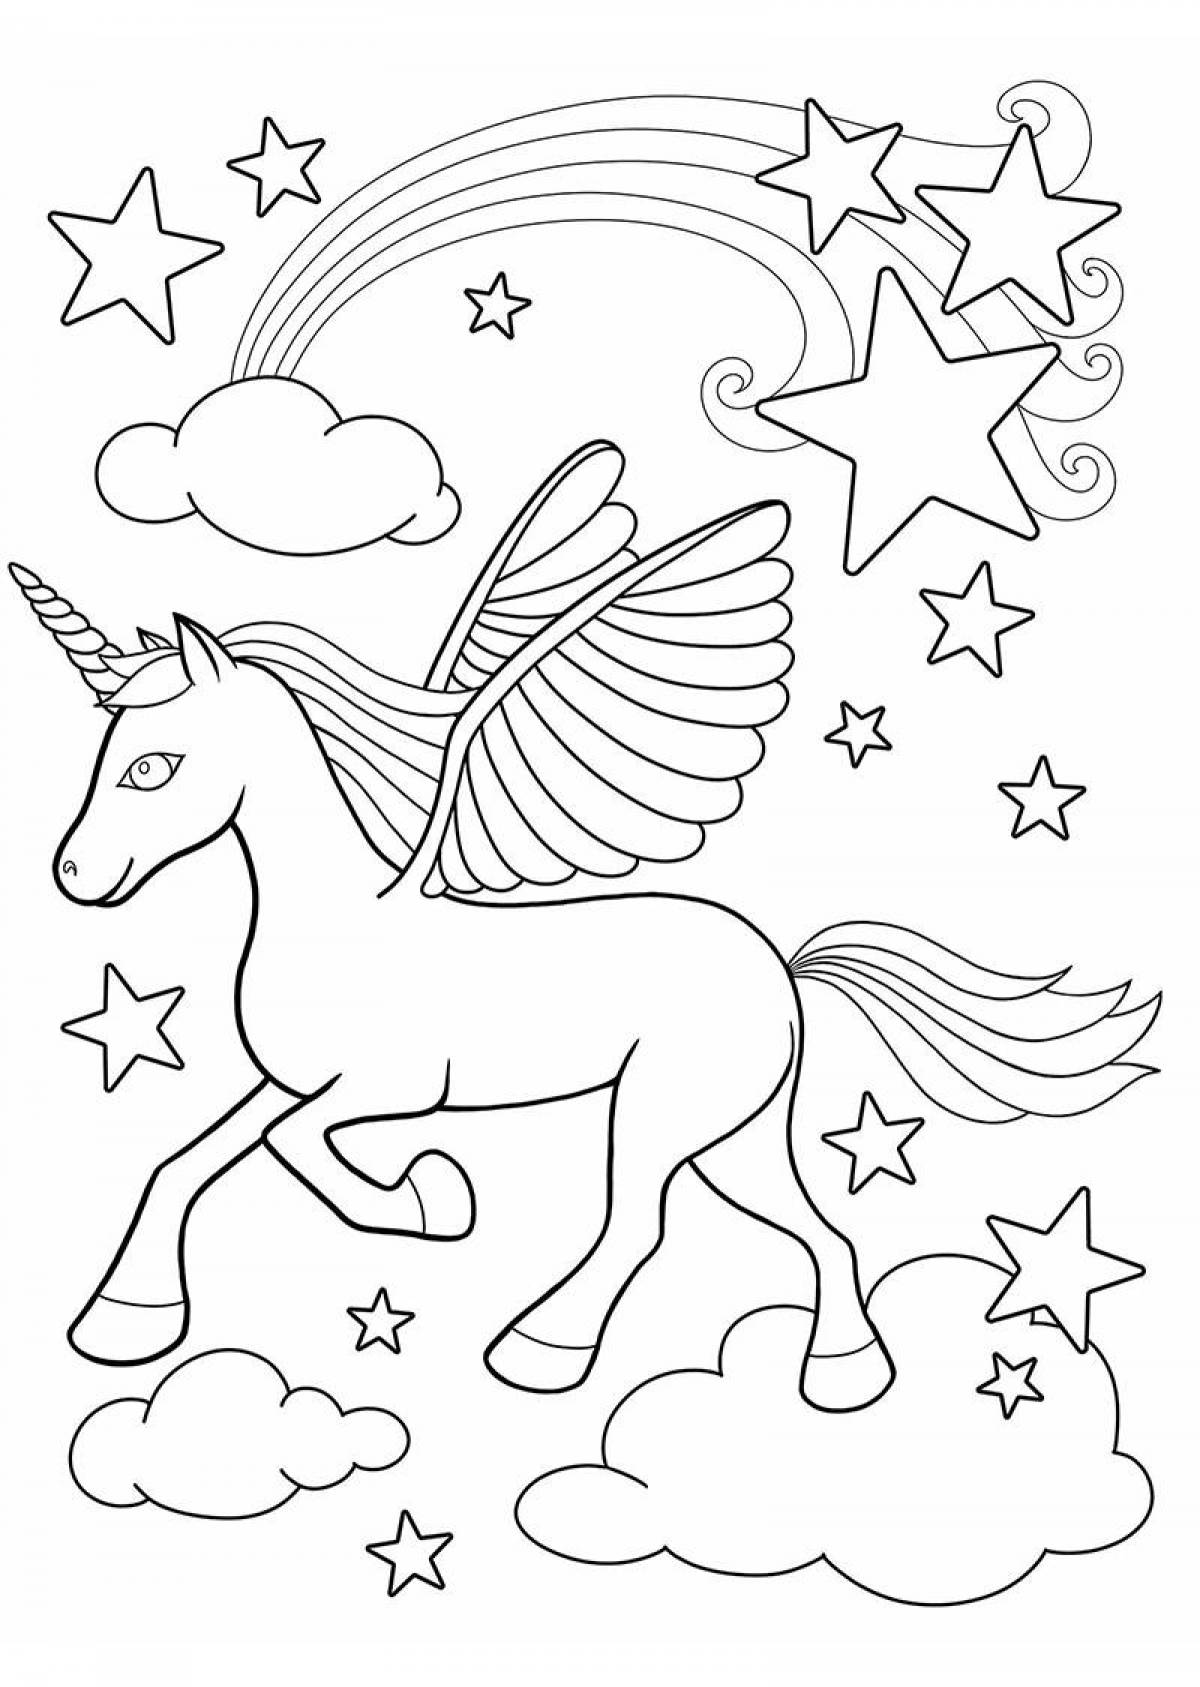 Animated unicorn coloring book for children 4-5 years old